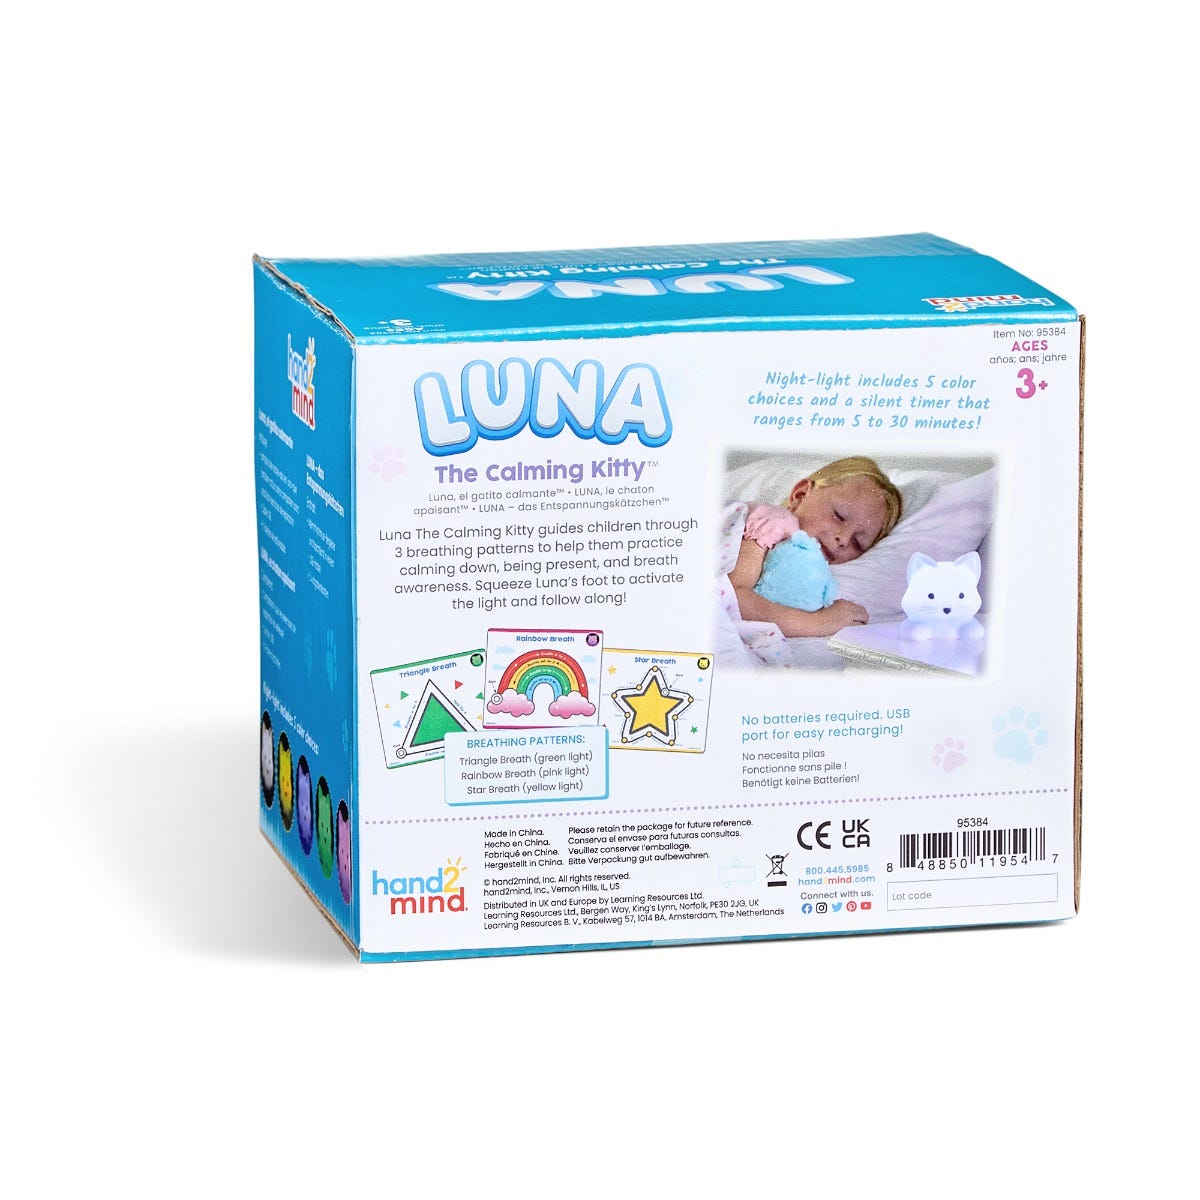 Luna The Calming Kitty, Luna The Calming Kitty is the purr-fect companion to help children manage stress and calm down at home, school, or anywhere they go. This squishy, soothing feline friend is designed to support mindfulness and deep breathing. Luna offers 3 different breathing patterns for children to practise and can be also used as a colourful night-light to comfort children at bedtime. Press Luna’s paw to activate and help children manage their emotions and develop mindfulness through guided breathi